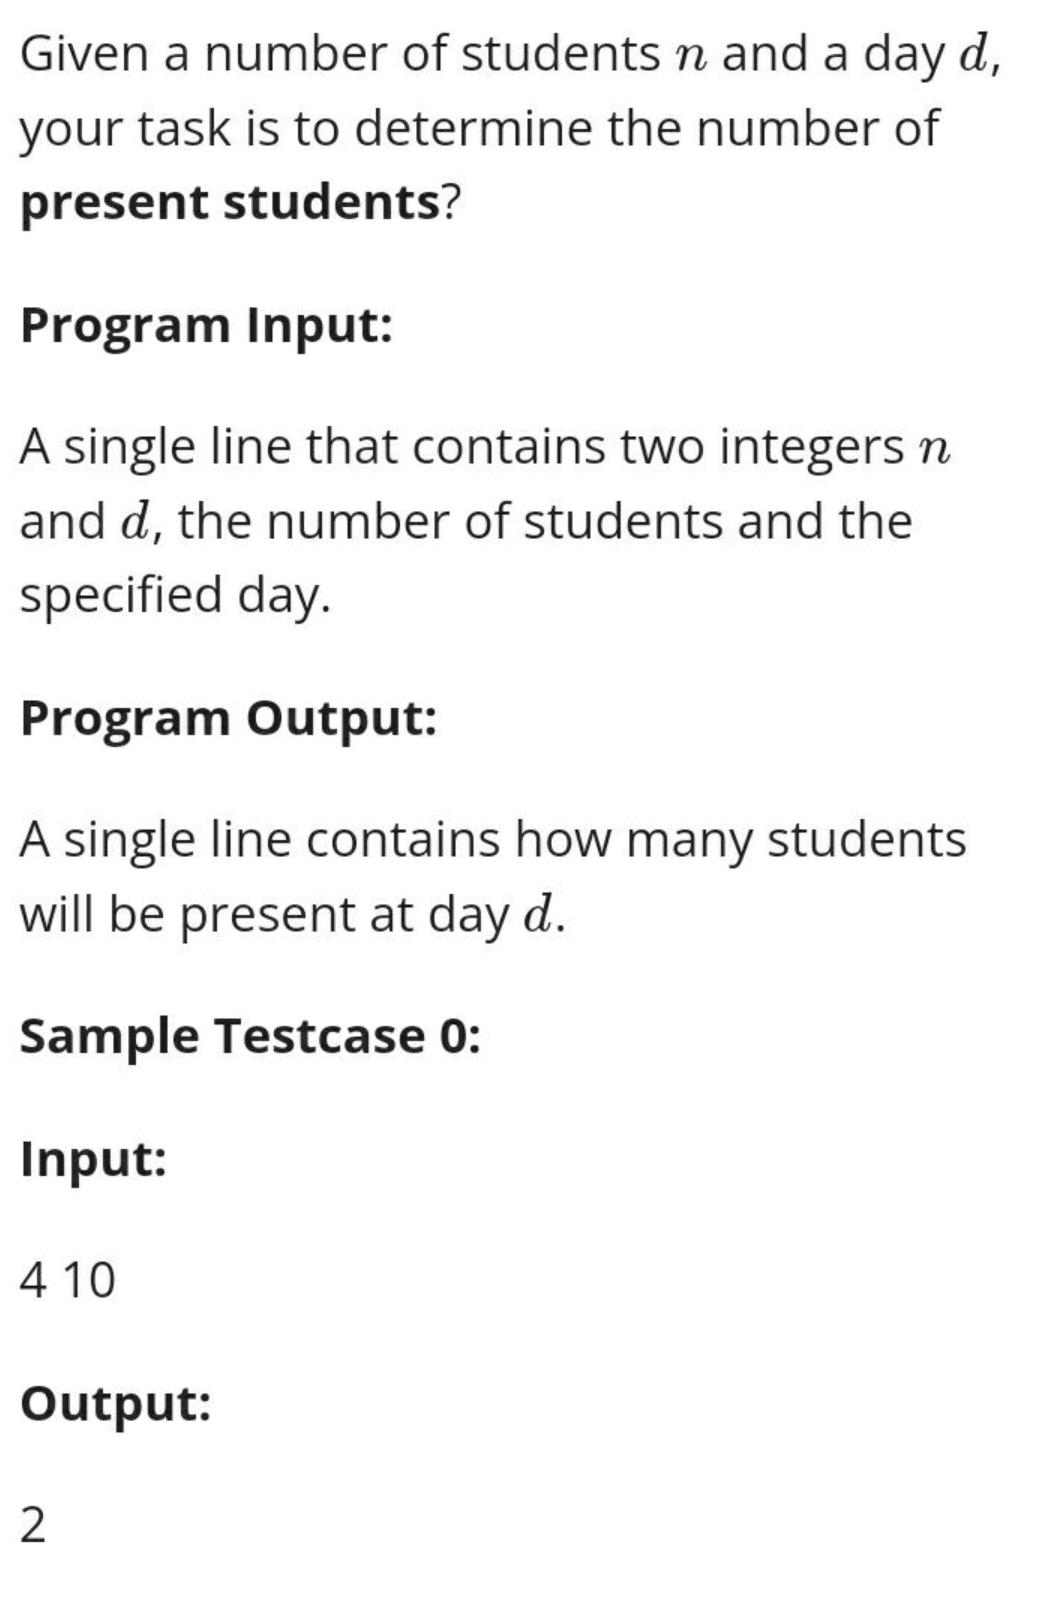 Given a number of students n and a day d,
your task is to determine the number of
present students?
Program Input:
A single line that contains two integers n
and d, the number of students and the
specified day.
Program Output:
A single line contains how many students
will be present at day d.
Sample Testcase 0:
Input:
410
Output:
2